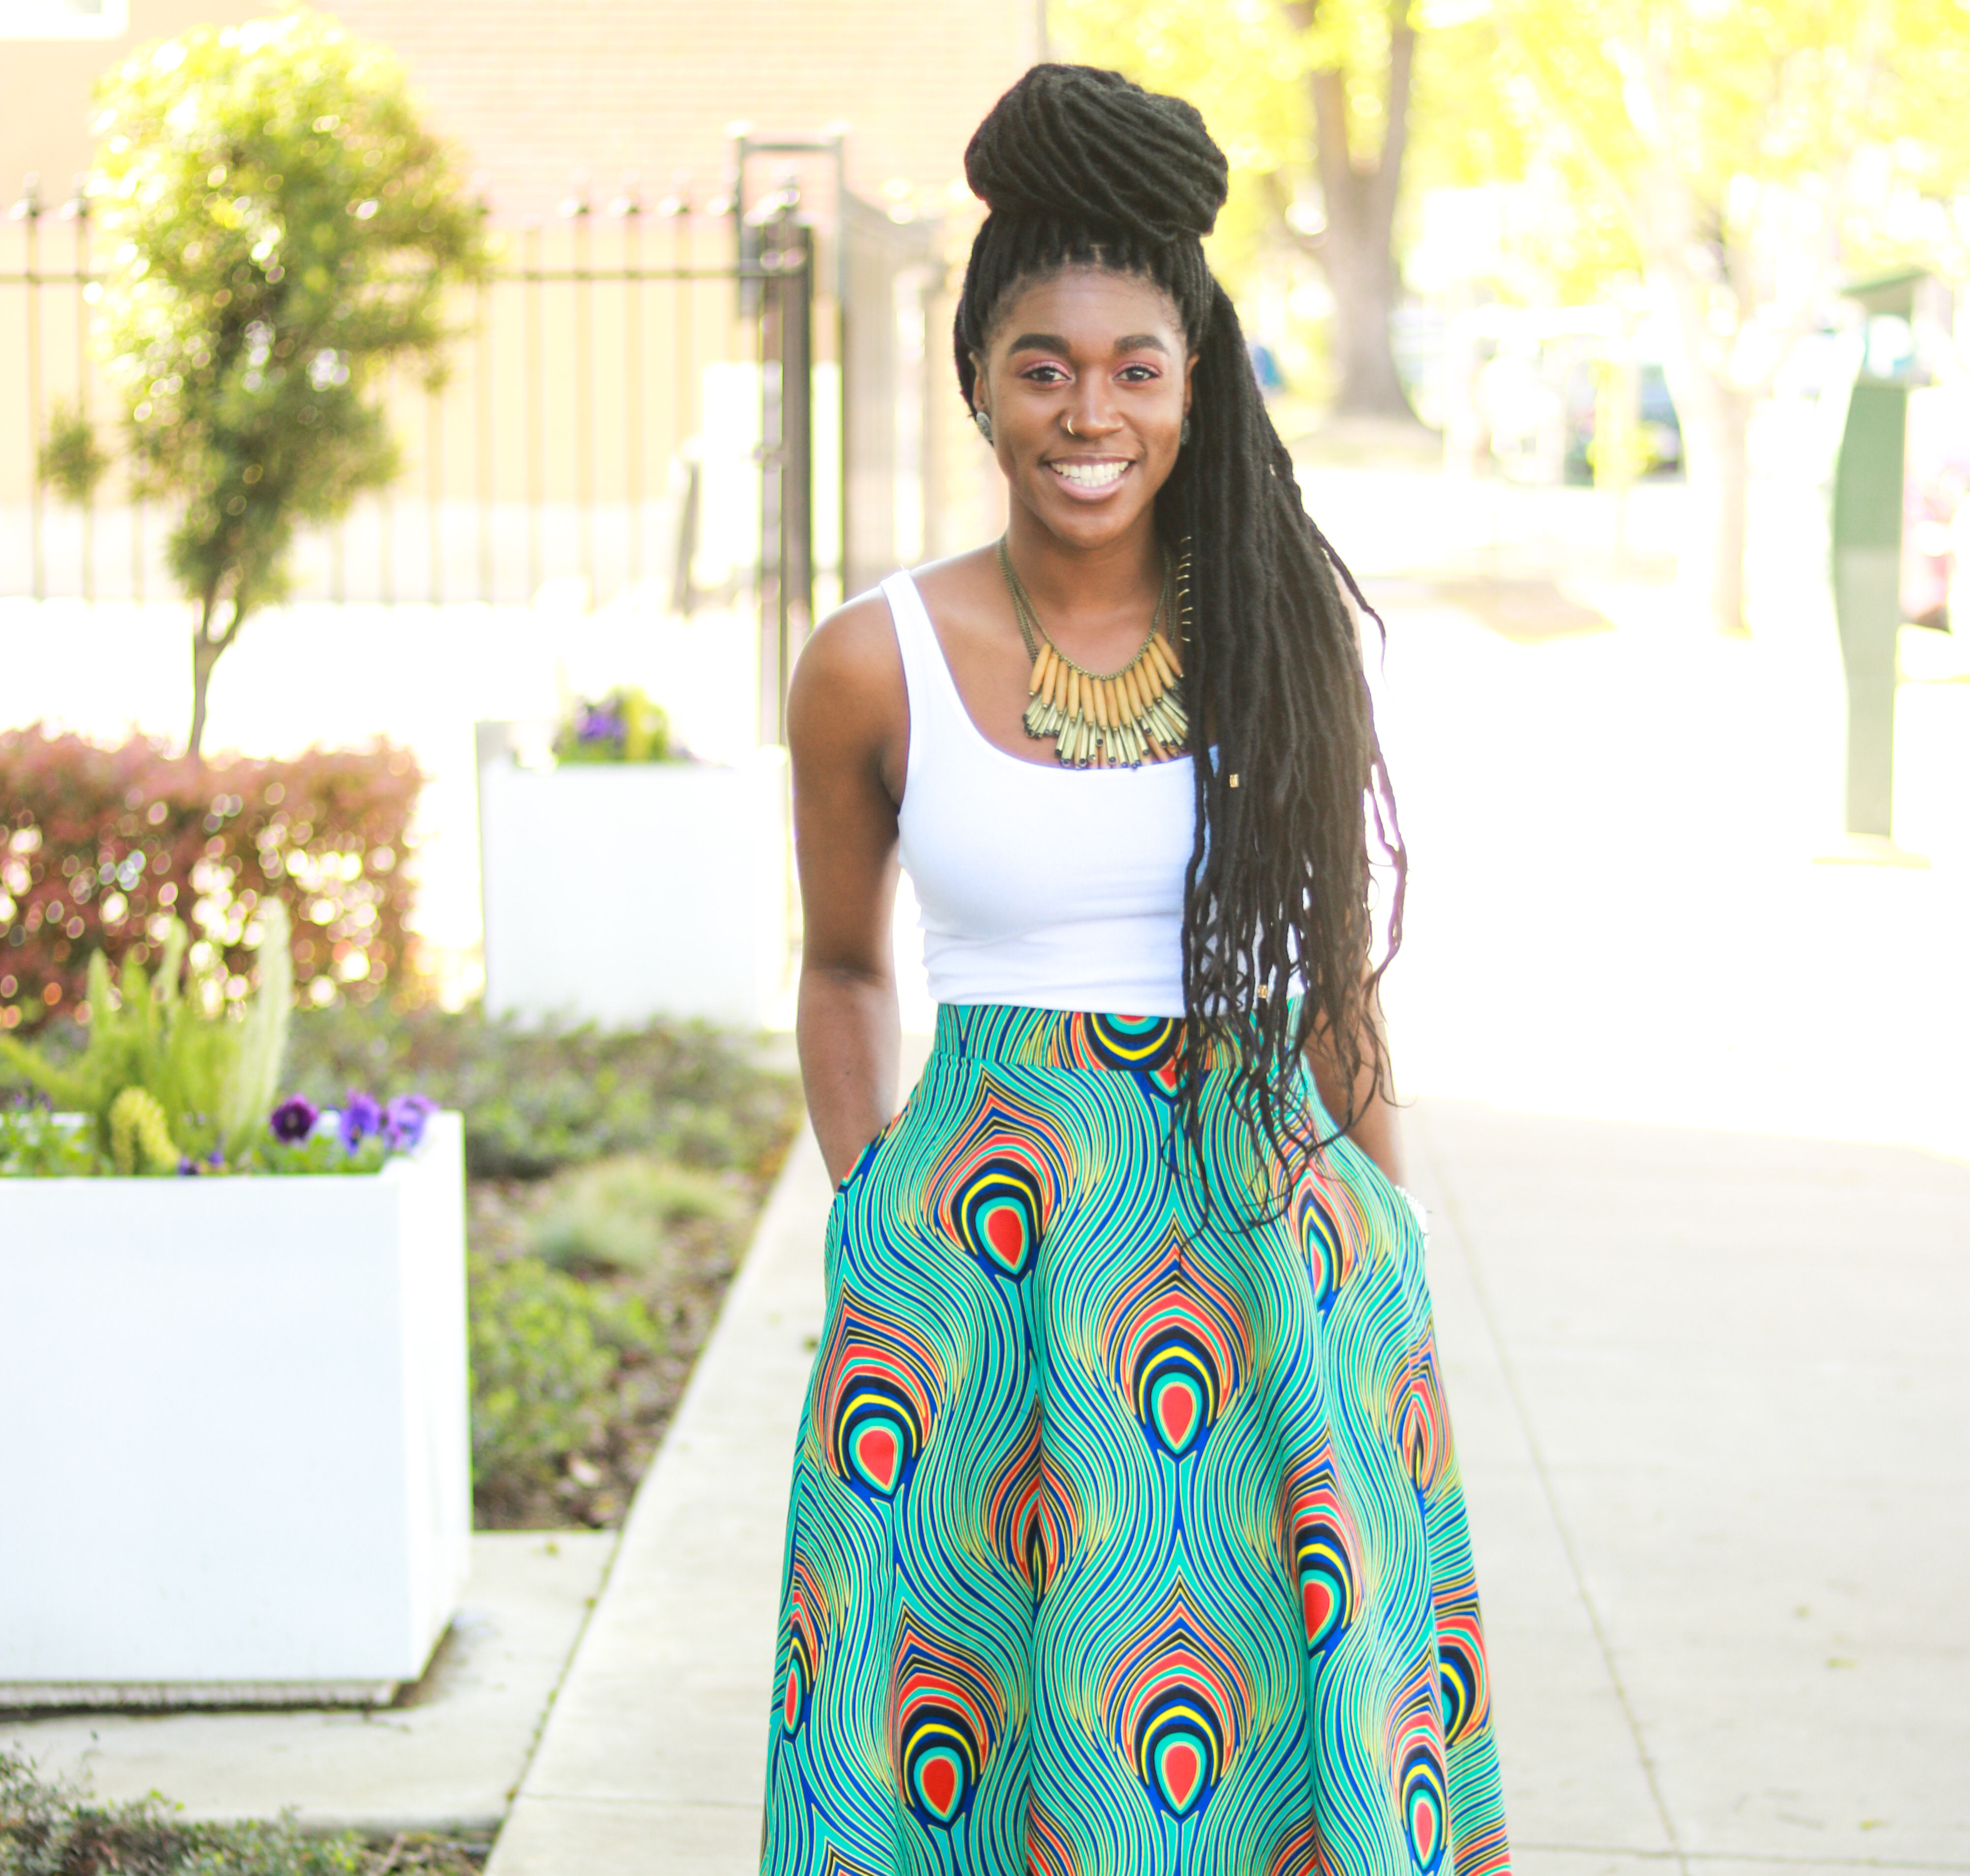 How to sew a simple half circle Skirt without a zipper